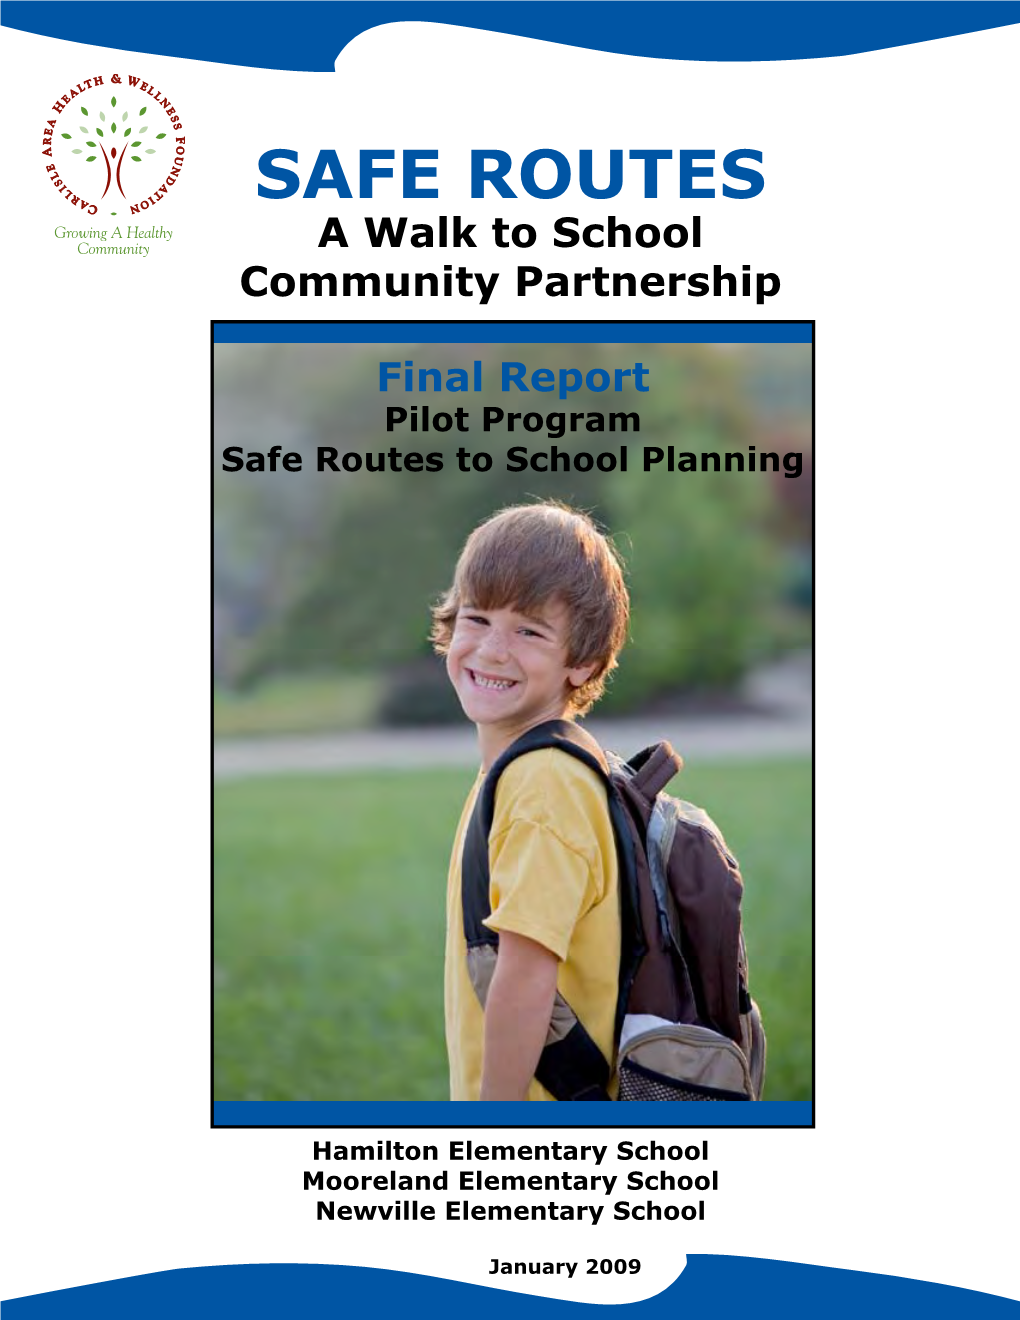 SAFE ROUTES a Walk to School Community Partnership